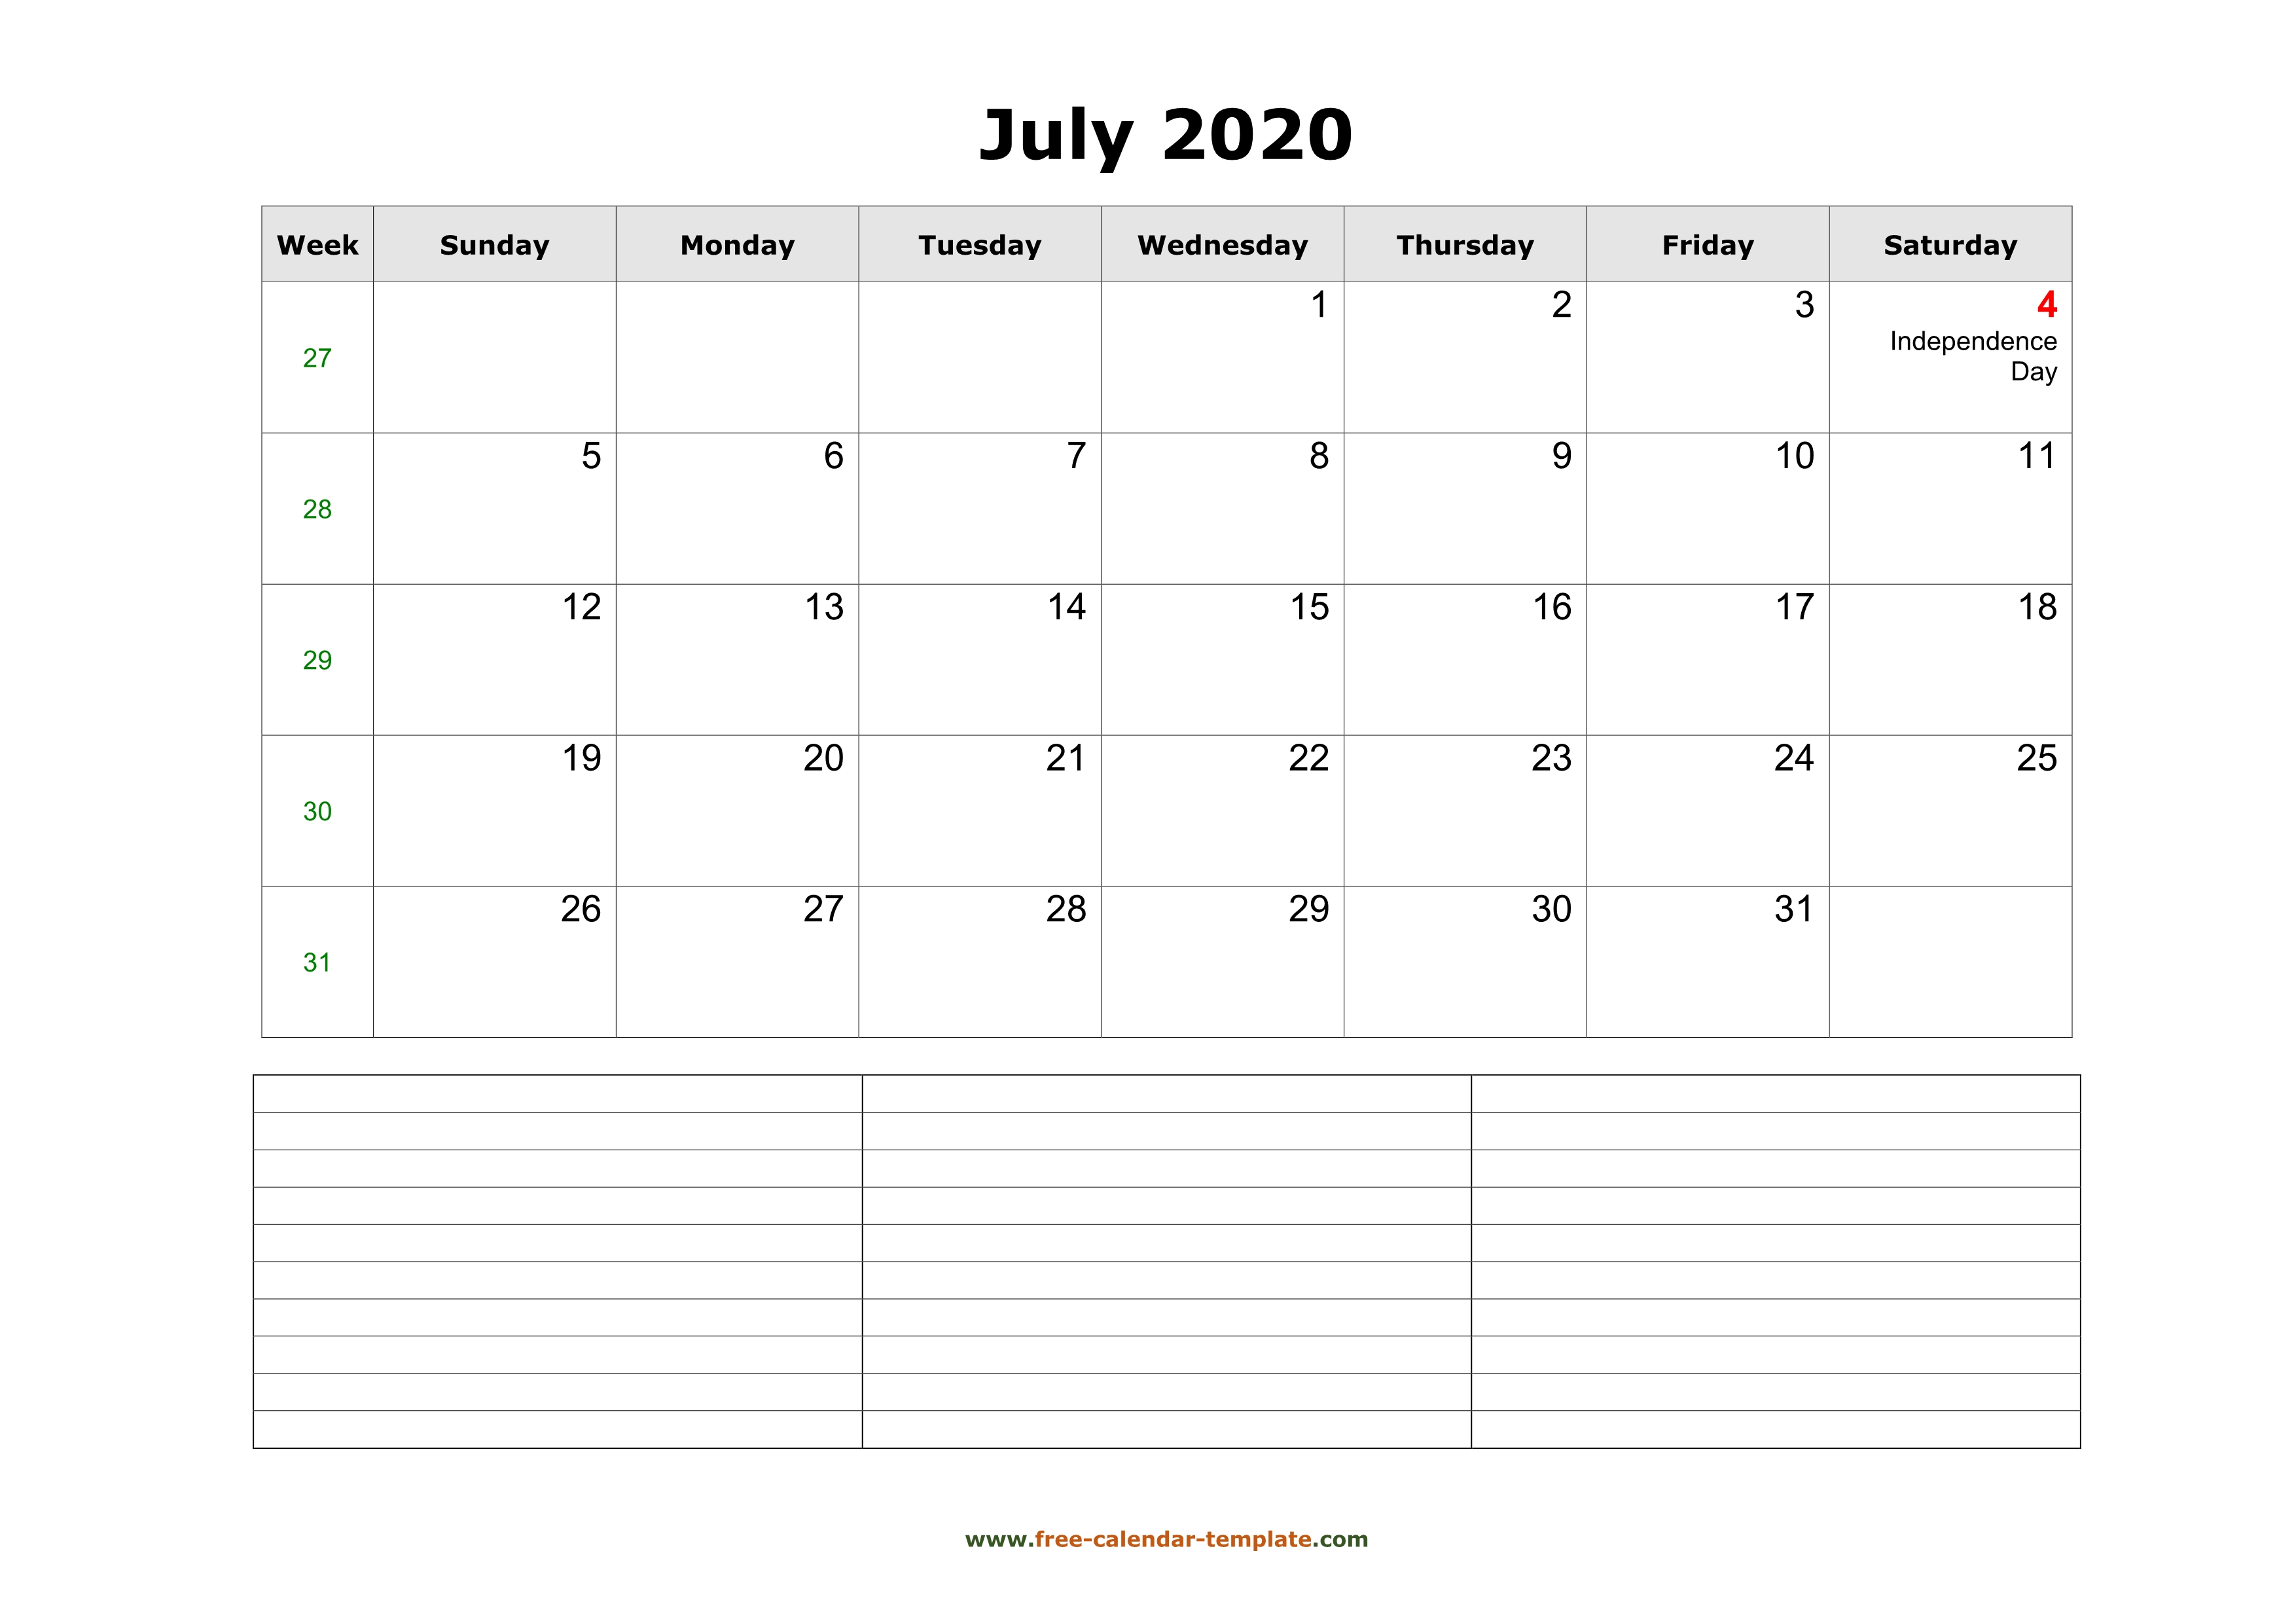 Free Appointment Calendar Template from www.free-calendar-template.com